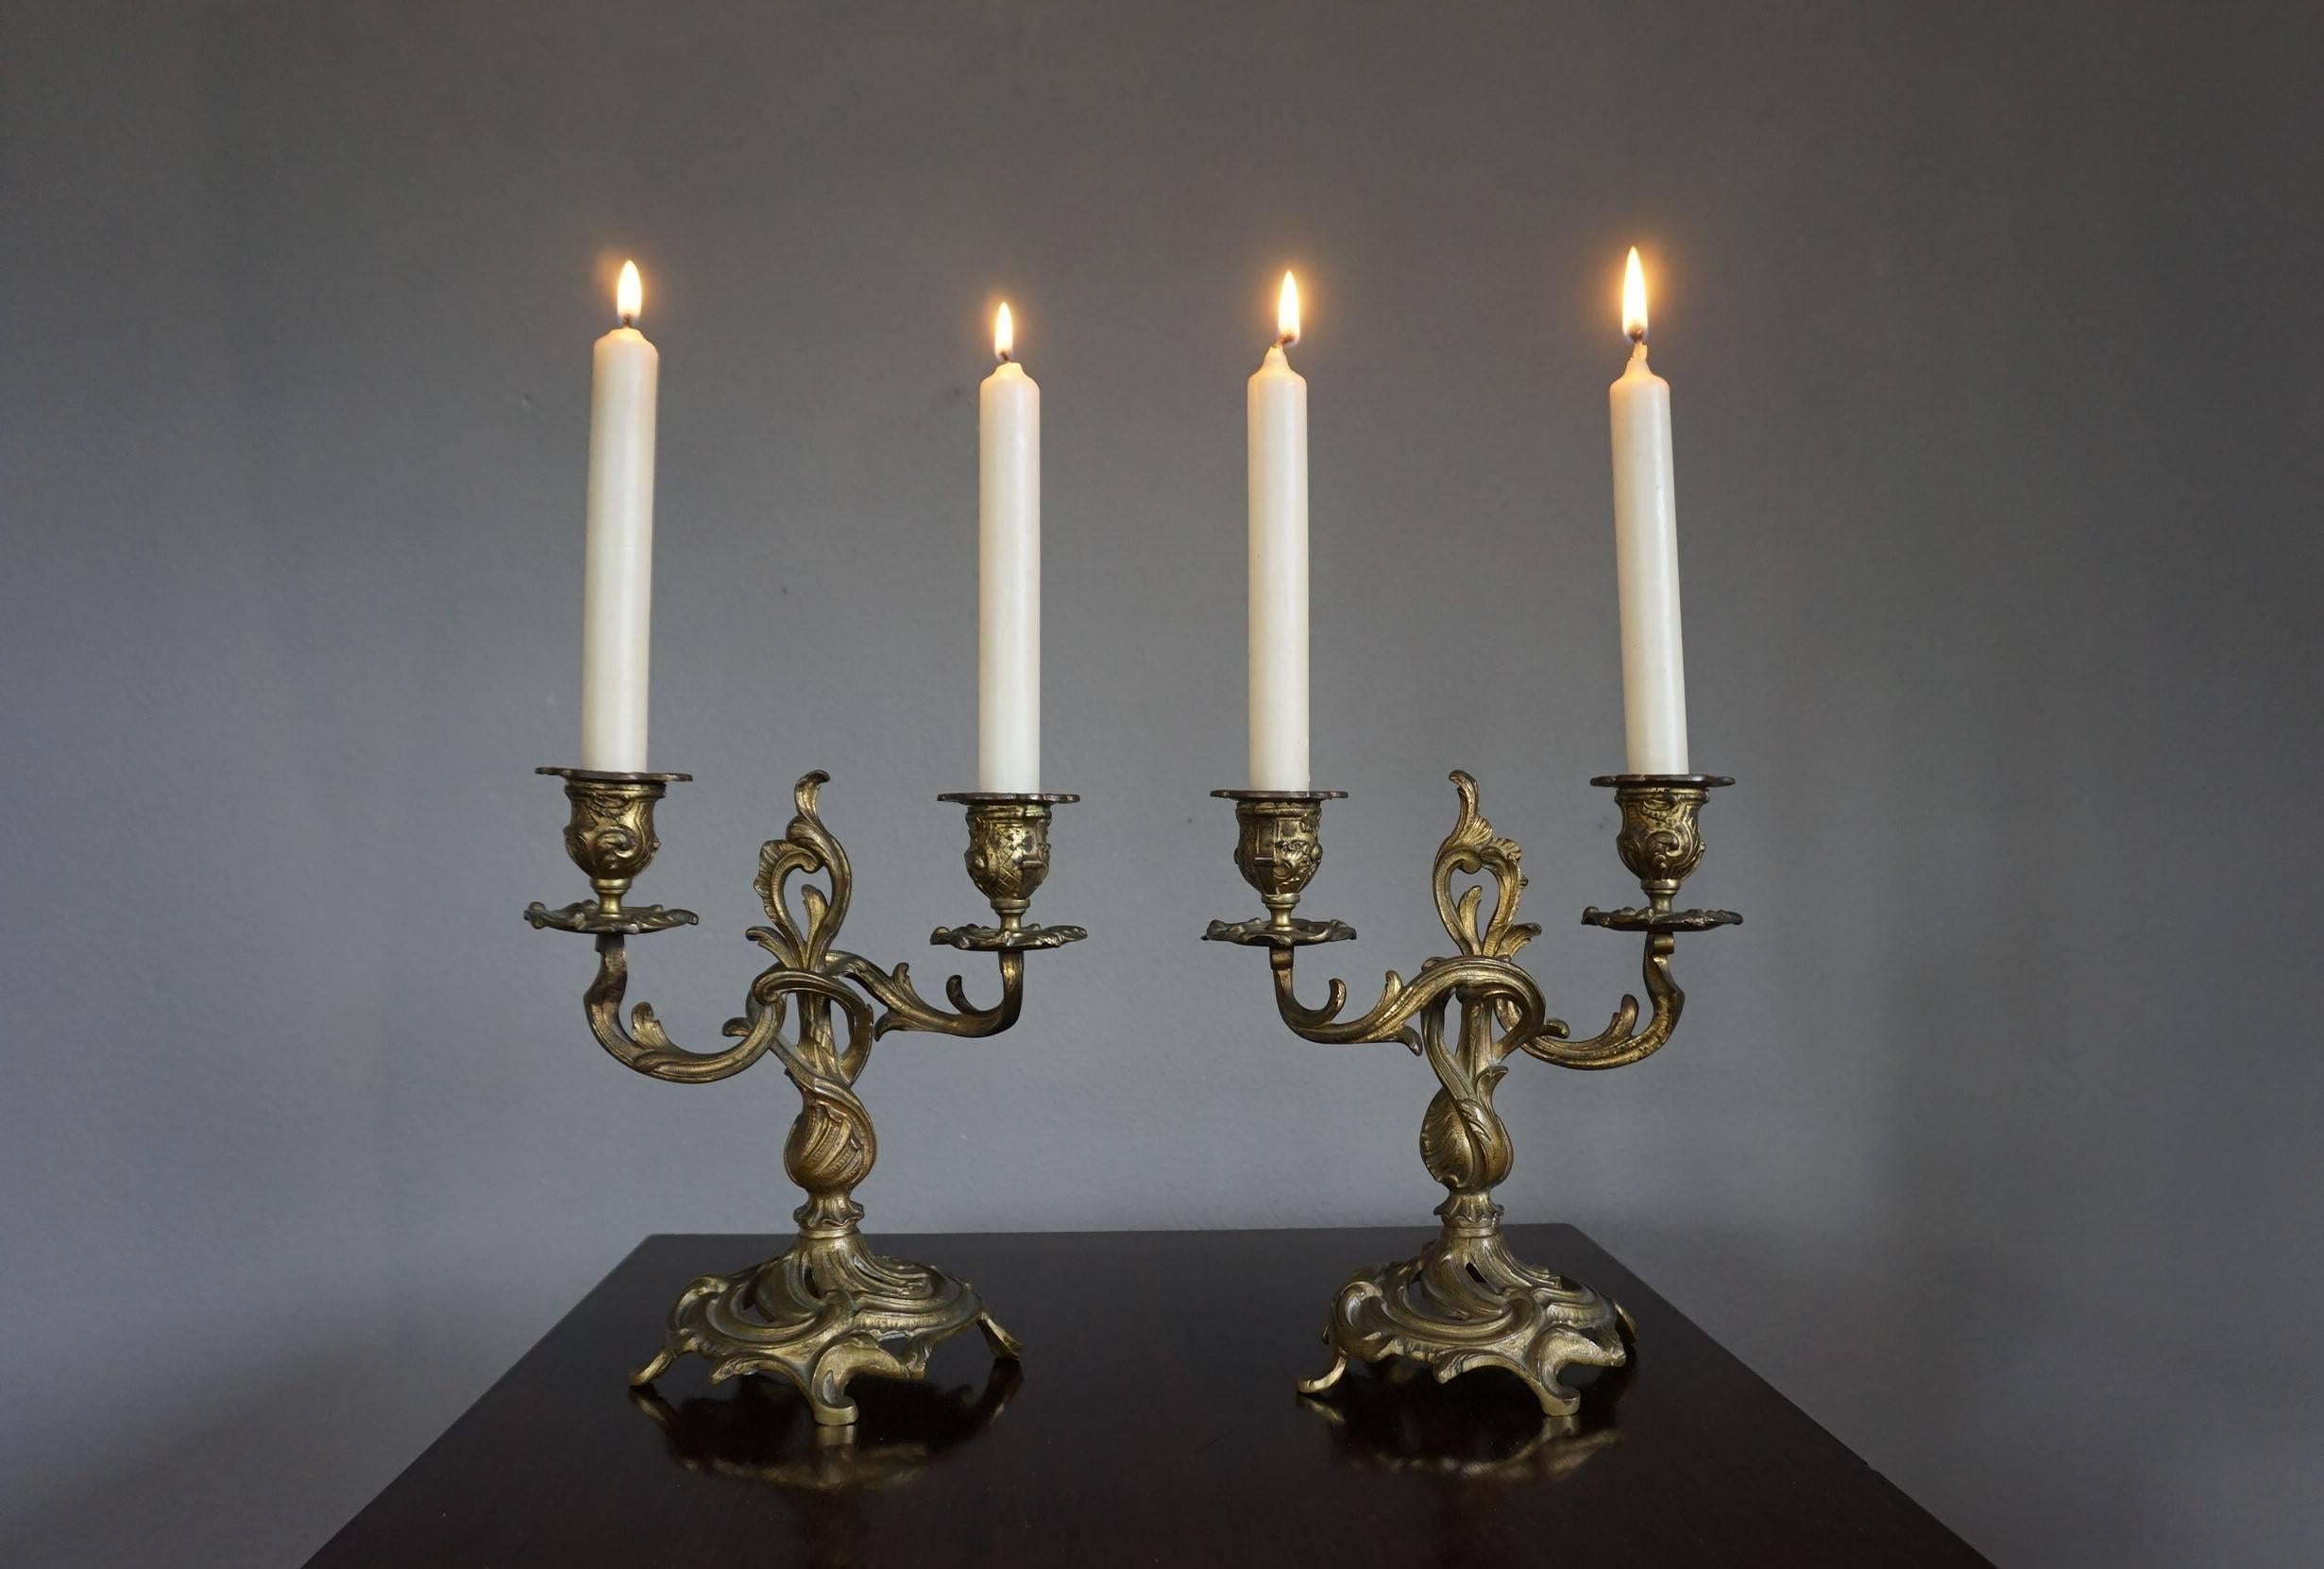 Louis XV Small Pair of Early 20th Century Gilt Bronze French Candelabras / Candleholders